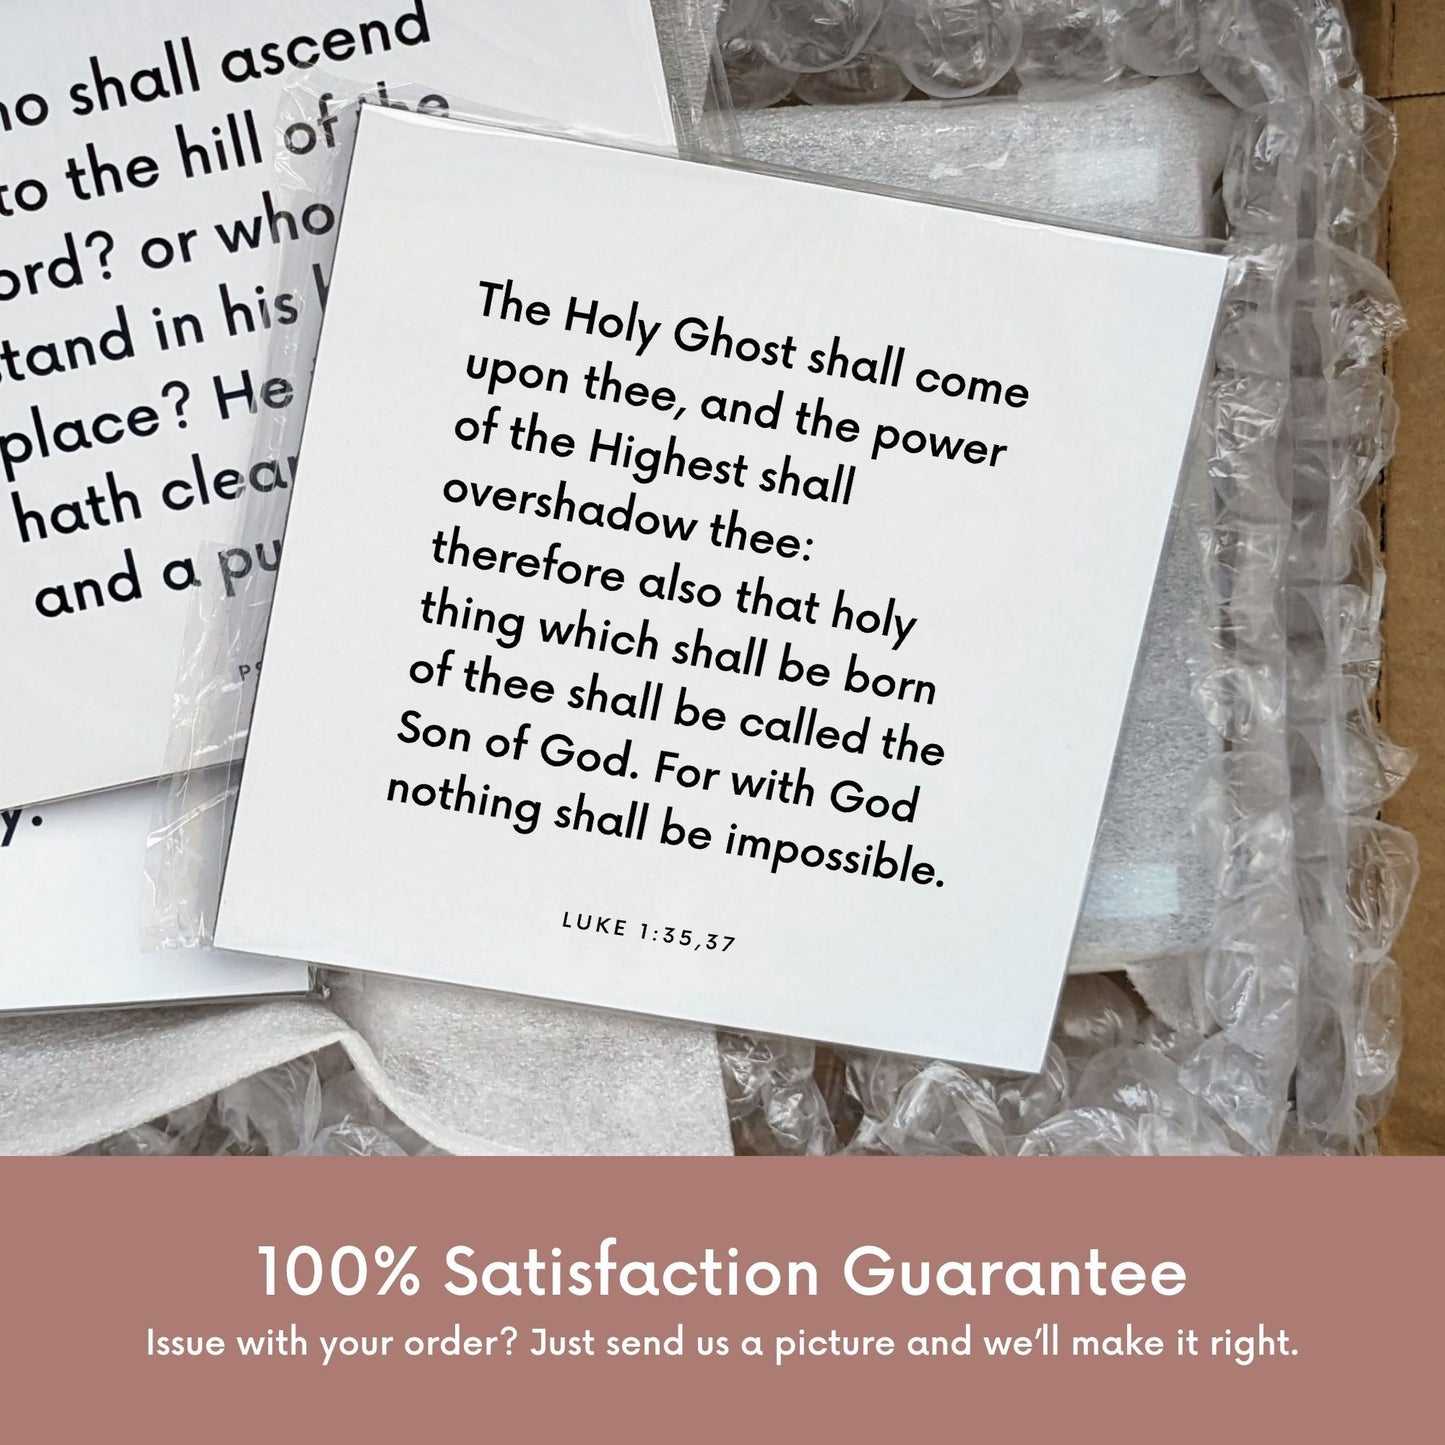 Shipping materials for scripture tile of Luke 1:35,37 - "The Holy Ghost shall come upon thee"